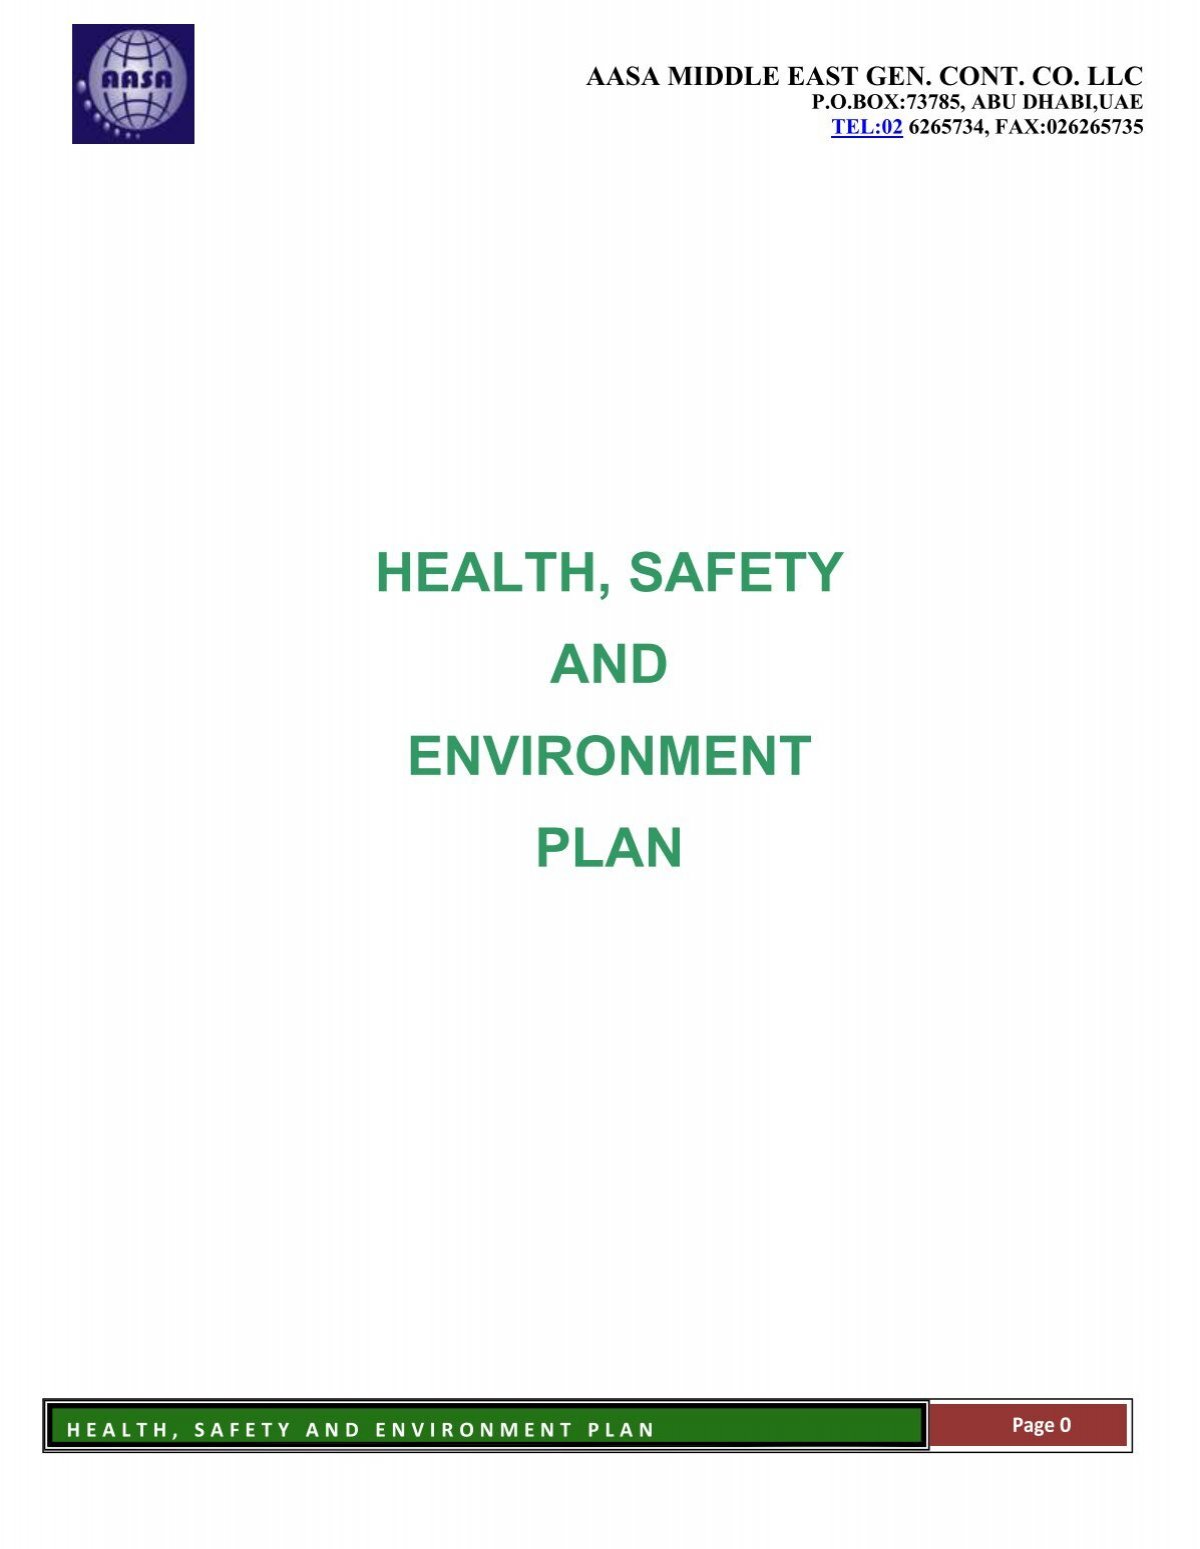 health-safety-and-environment-plan